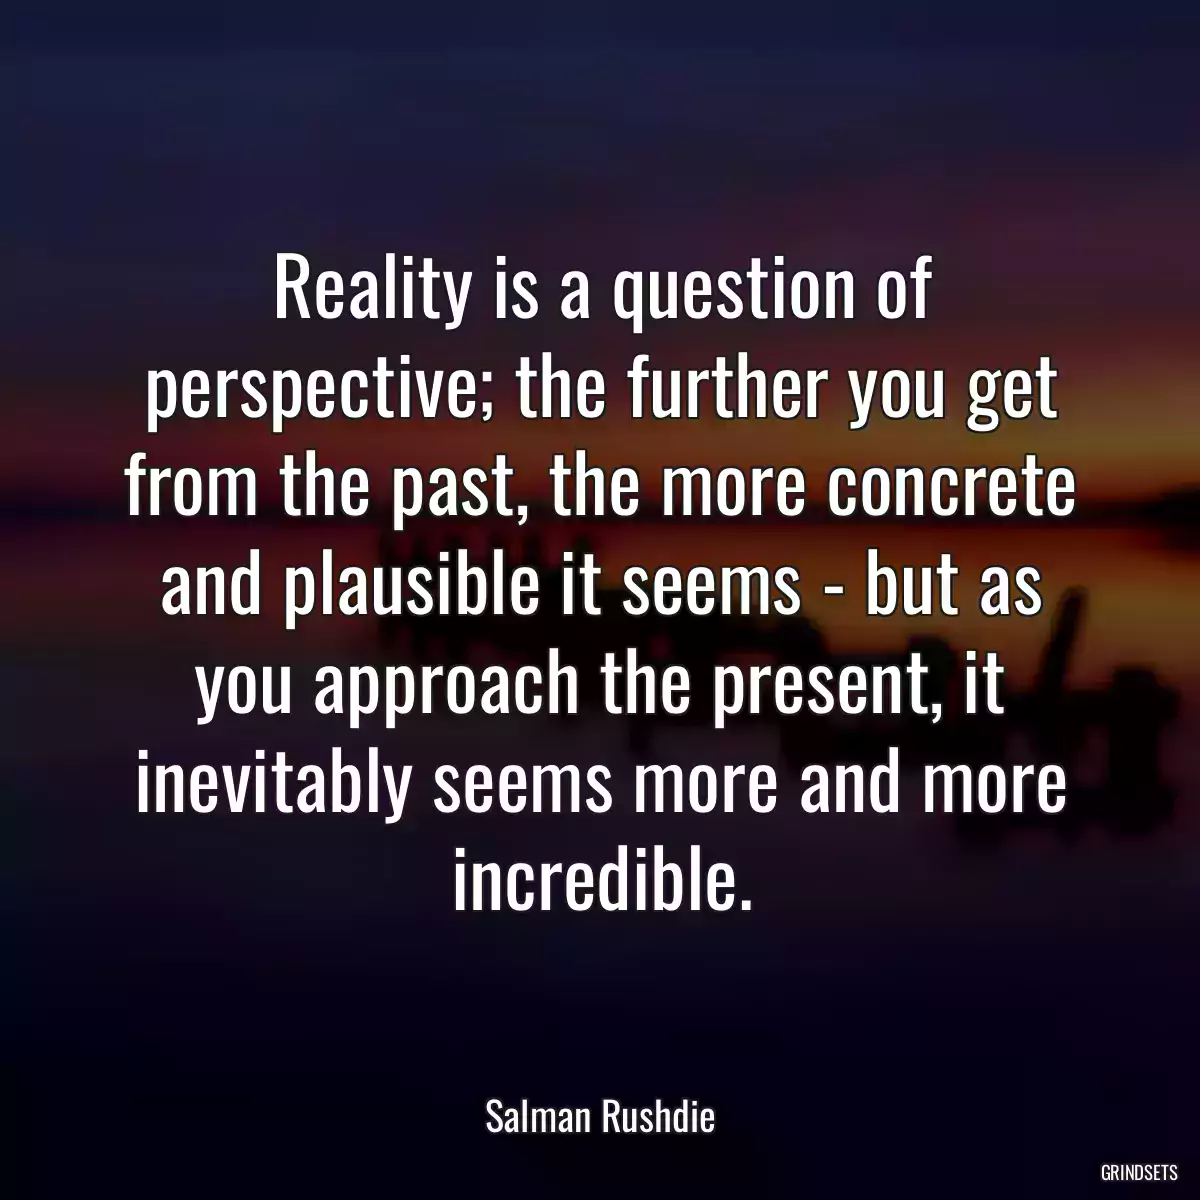 Reality is a question of perspective; the further you get from the past, the more concrete and plausible it seems - but as you approach the present, it inevitably seems more and more incredible.